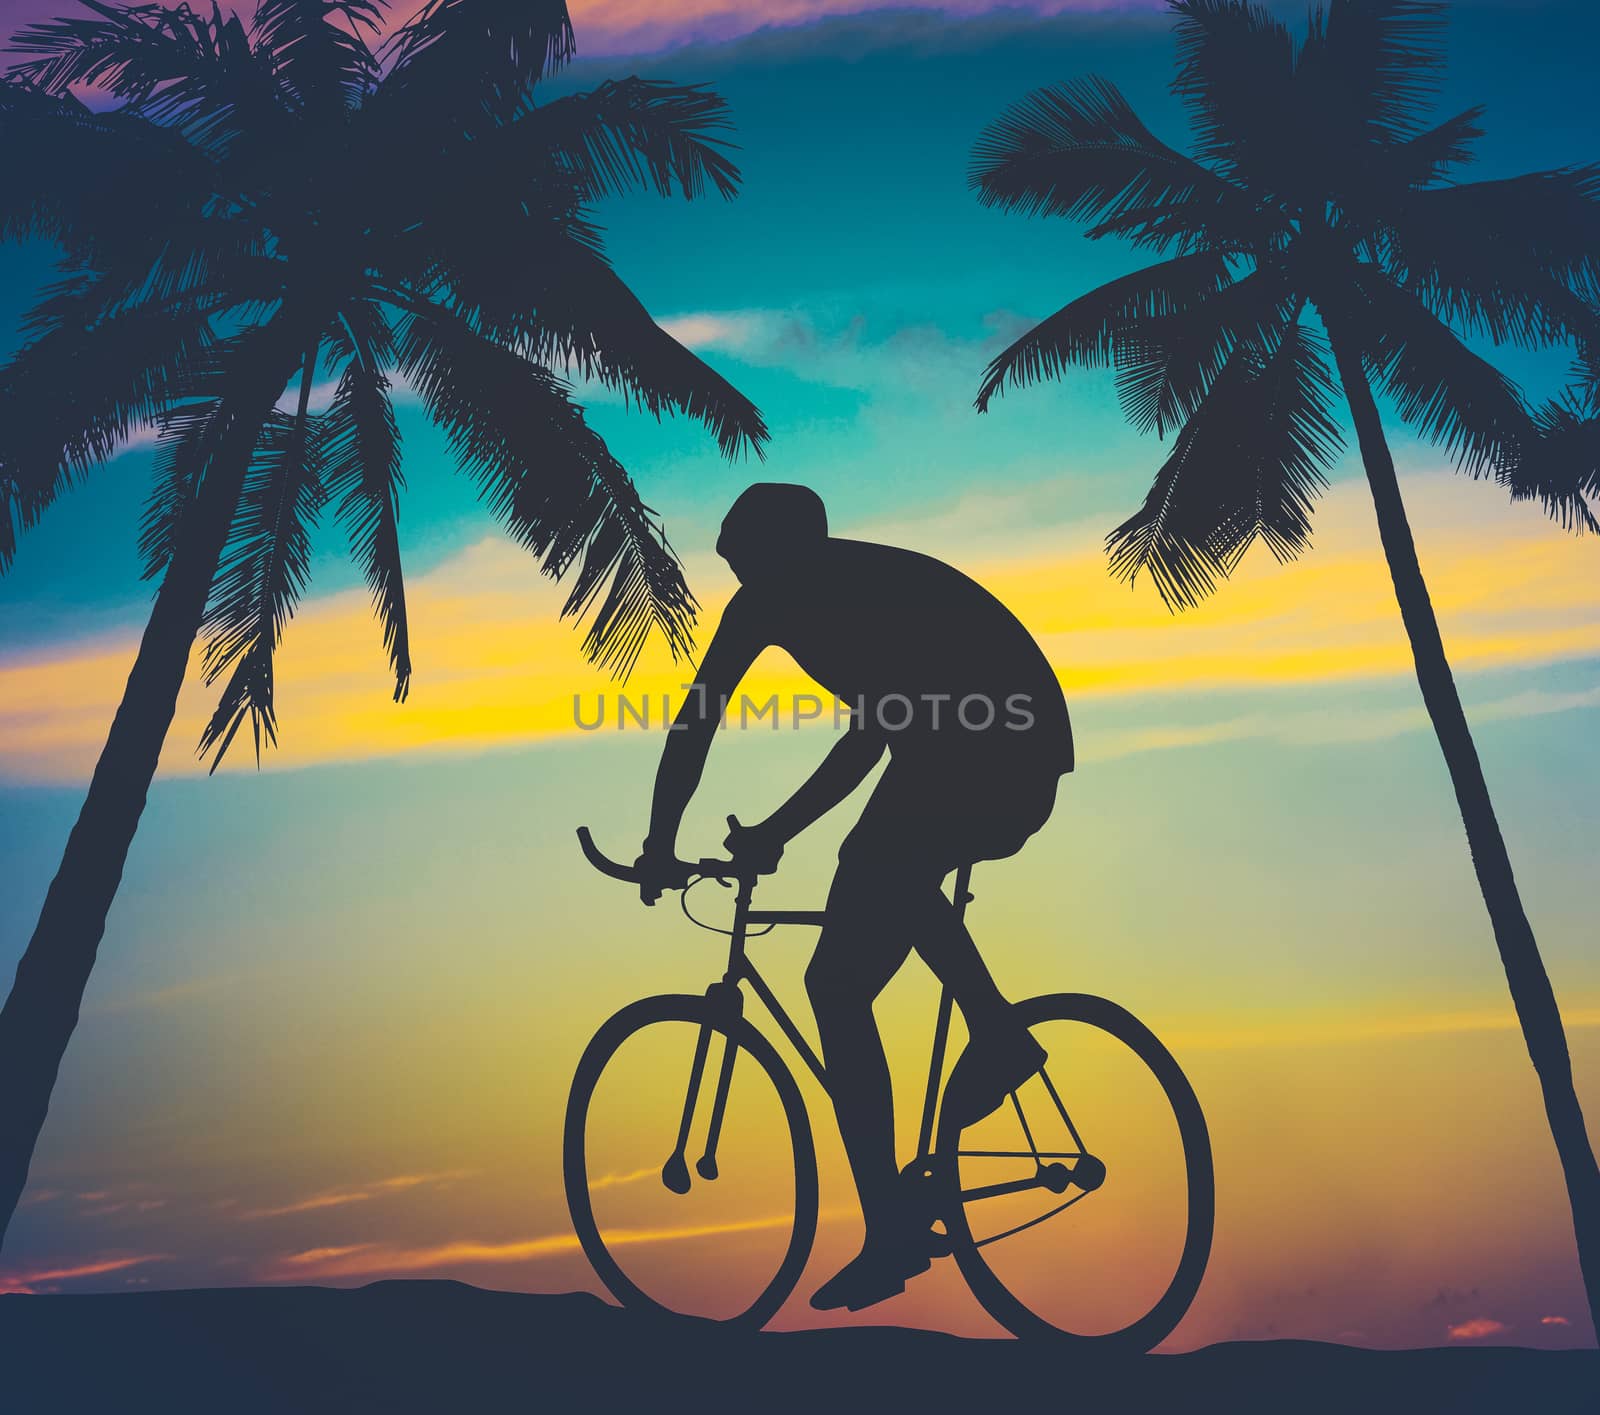 Retro Worn Style Photo Of A Man Cycling By Tropical Palm Trees